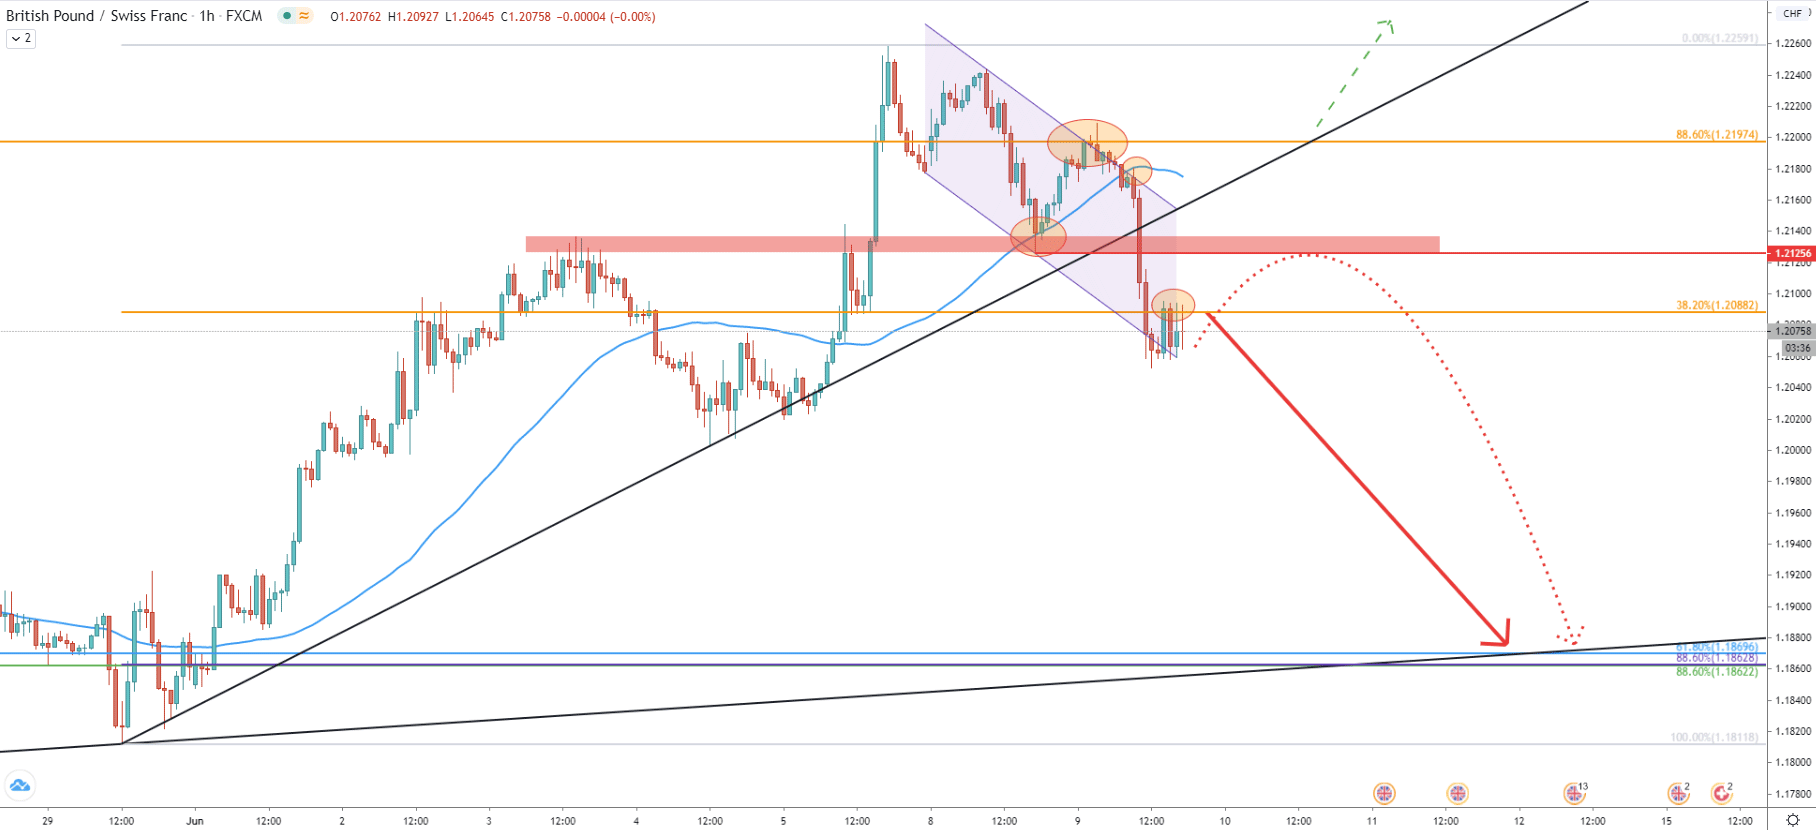 GBP/CHF 4-Hour Technical Analysis 9 June 2020